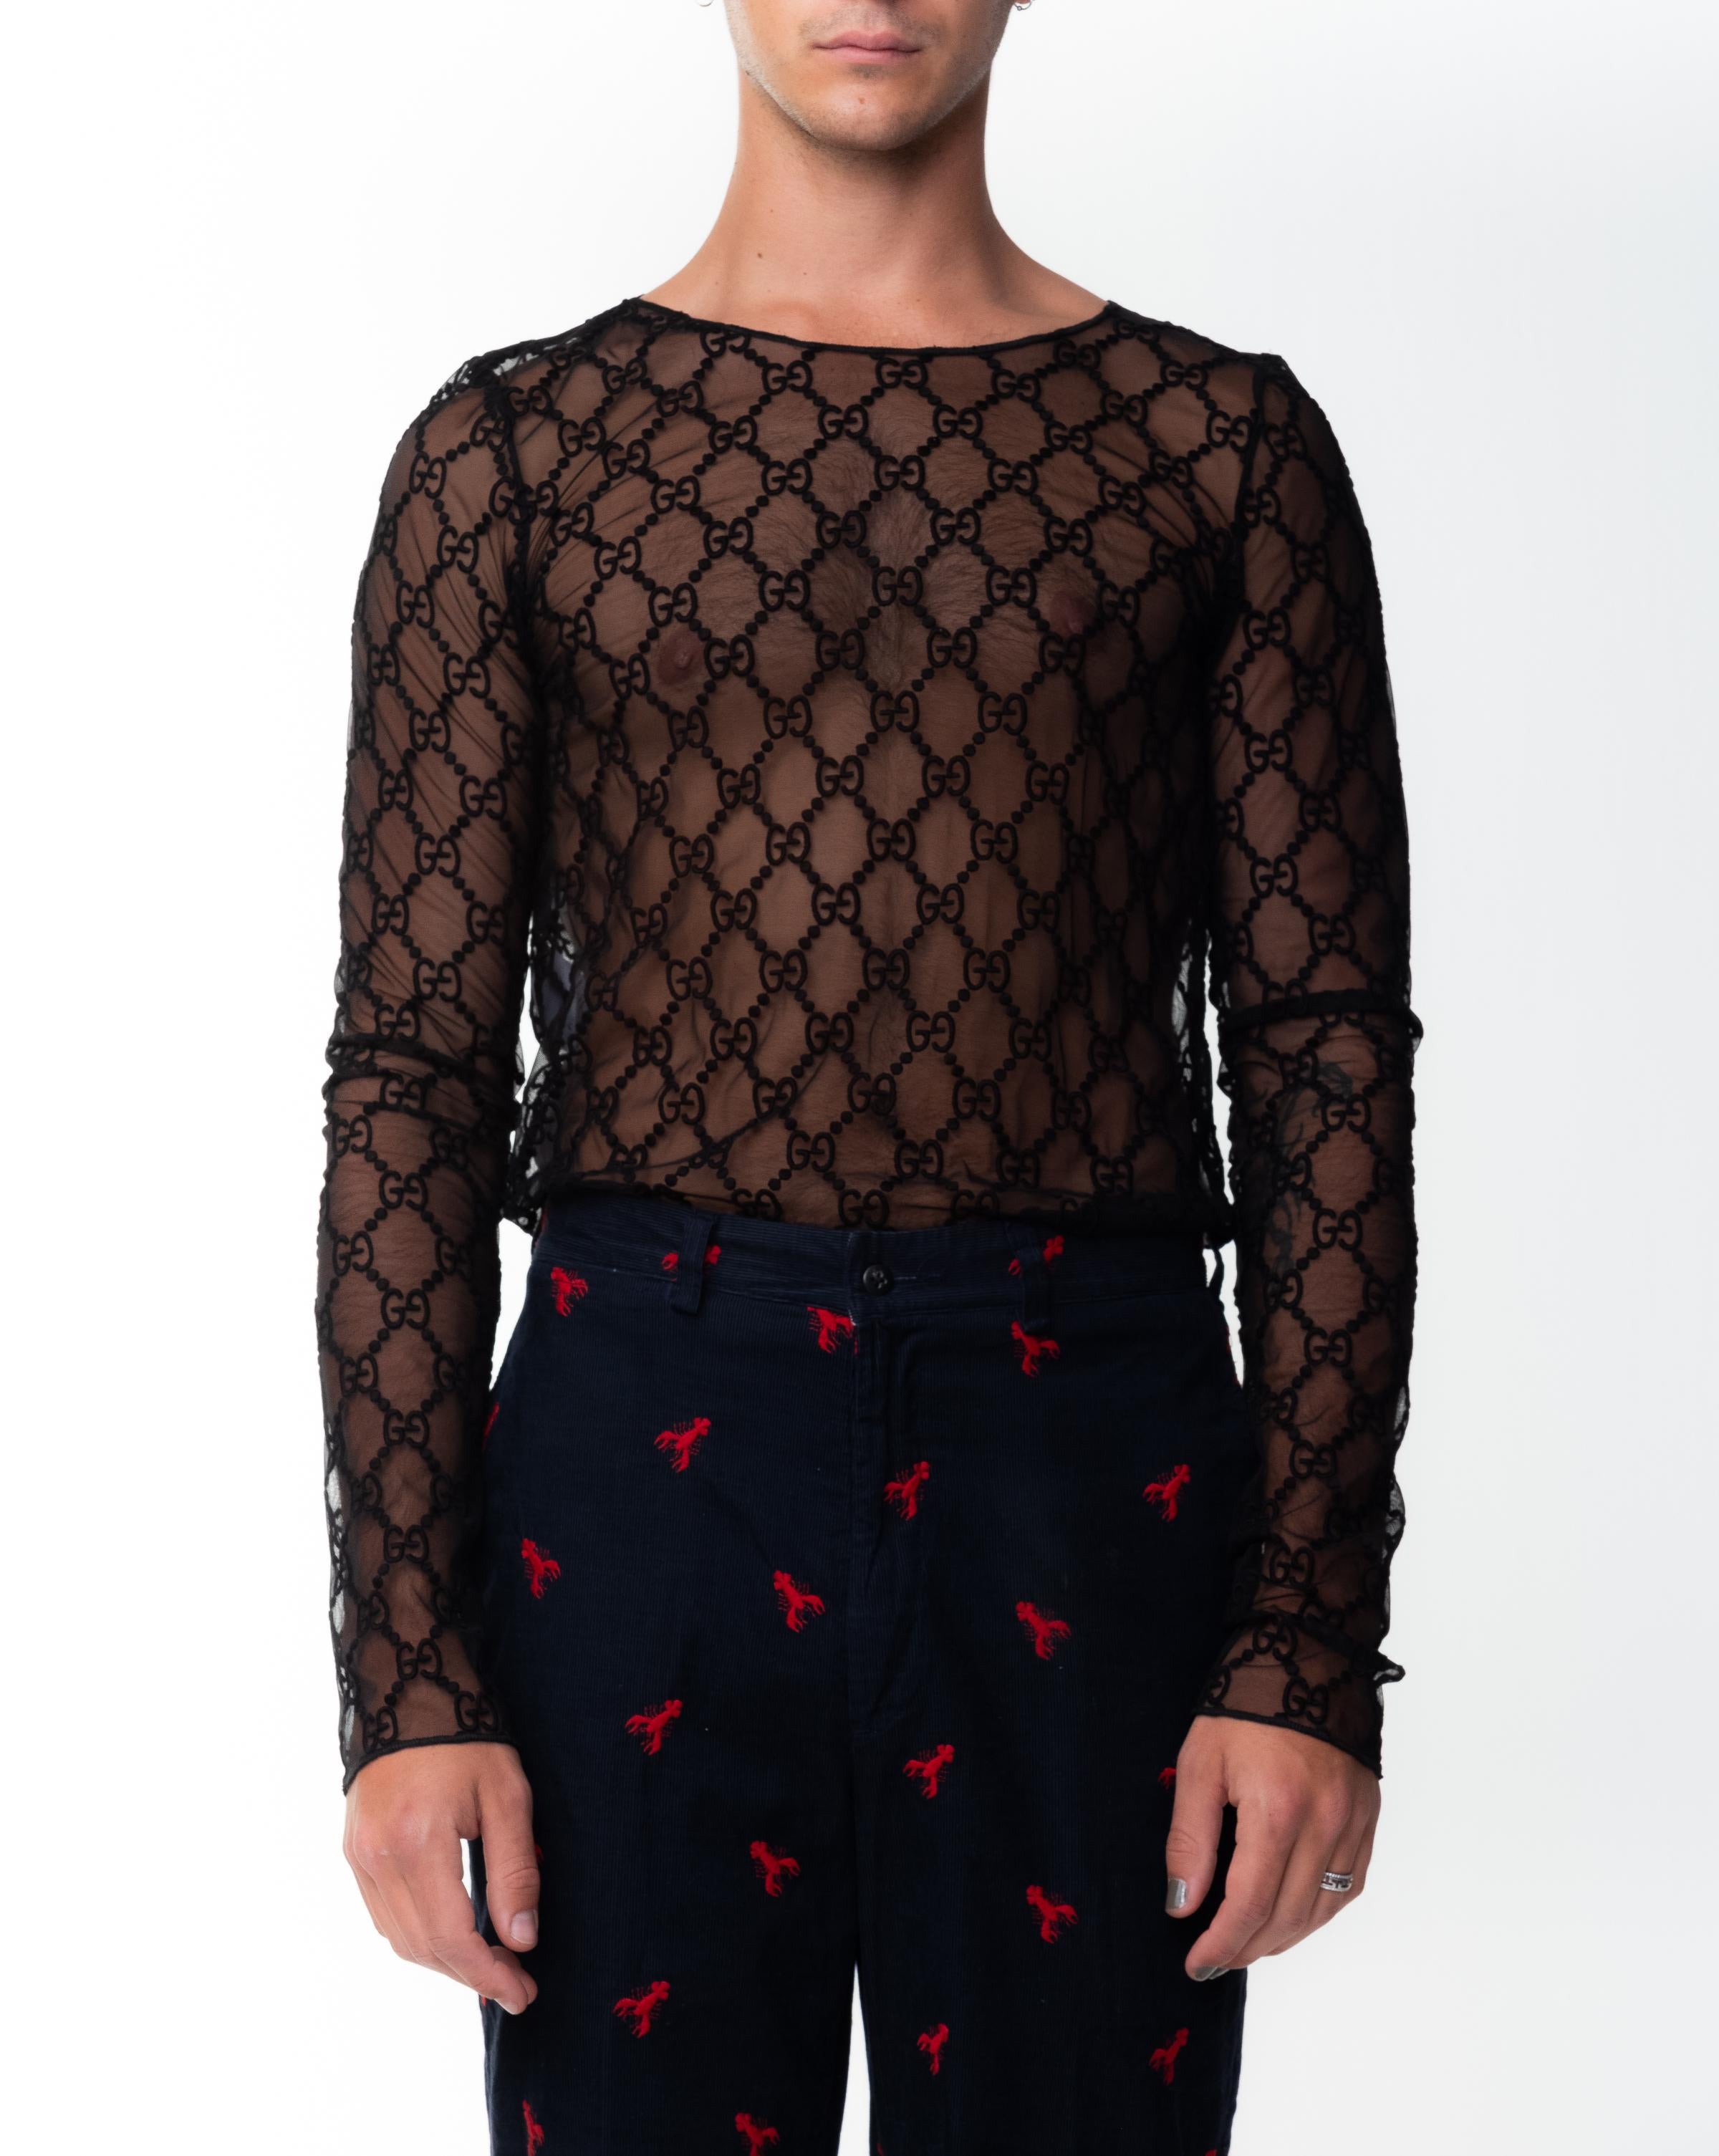 Gucci GG embroidered tull t-shirt. Featuring an unexpected mix of details, this long sleeve T-shirt combines House codes with romantic details. The historical GG pattern is embroidered in black thread onto a black tulle base. Long sleeve,